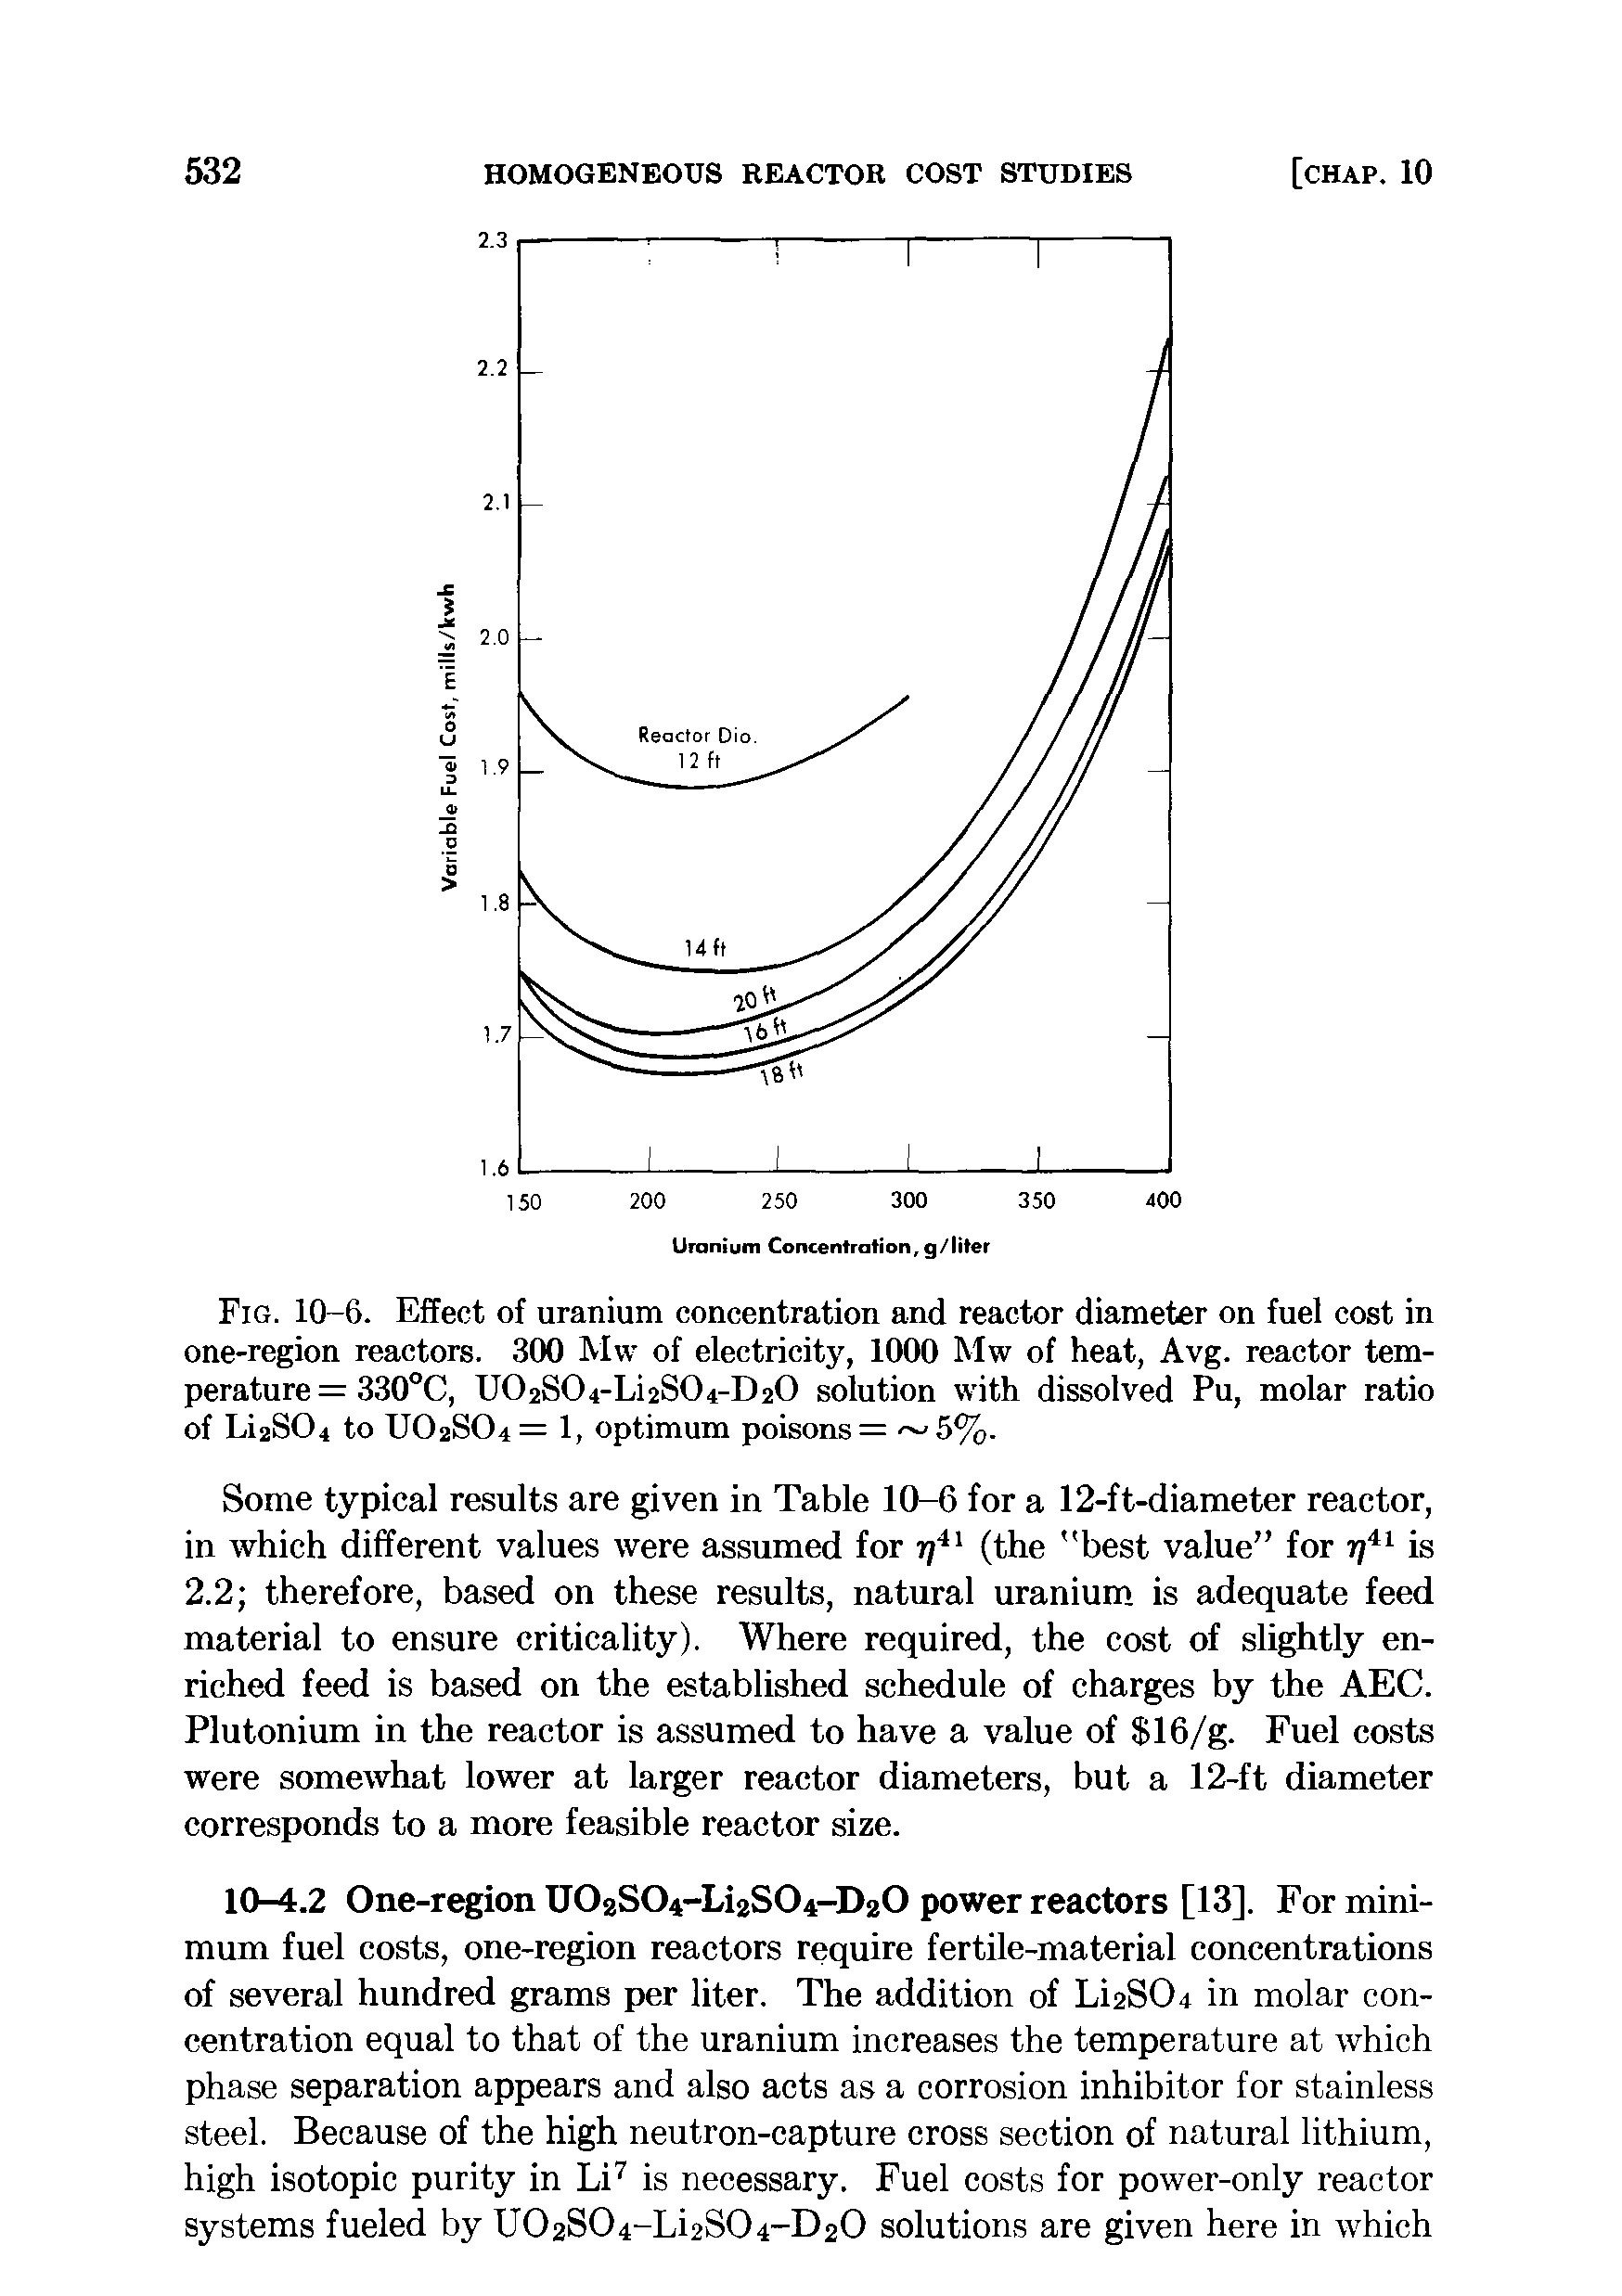 Fig. 10 6. Effect of uranium concentration and reactor diameter on fuel cost in one-region reactors. 300 Mw of electricity, 1000 Mw of heat, Avg. reactor temperature = 330°C, U02S04-Li2S04-D20 solution with dissolved Pu, molar ratio of Li2S04 to UO2SO4 = 1, optimum poisons = 5%.